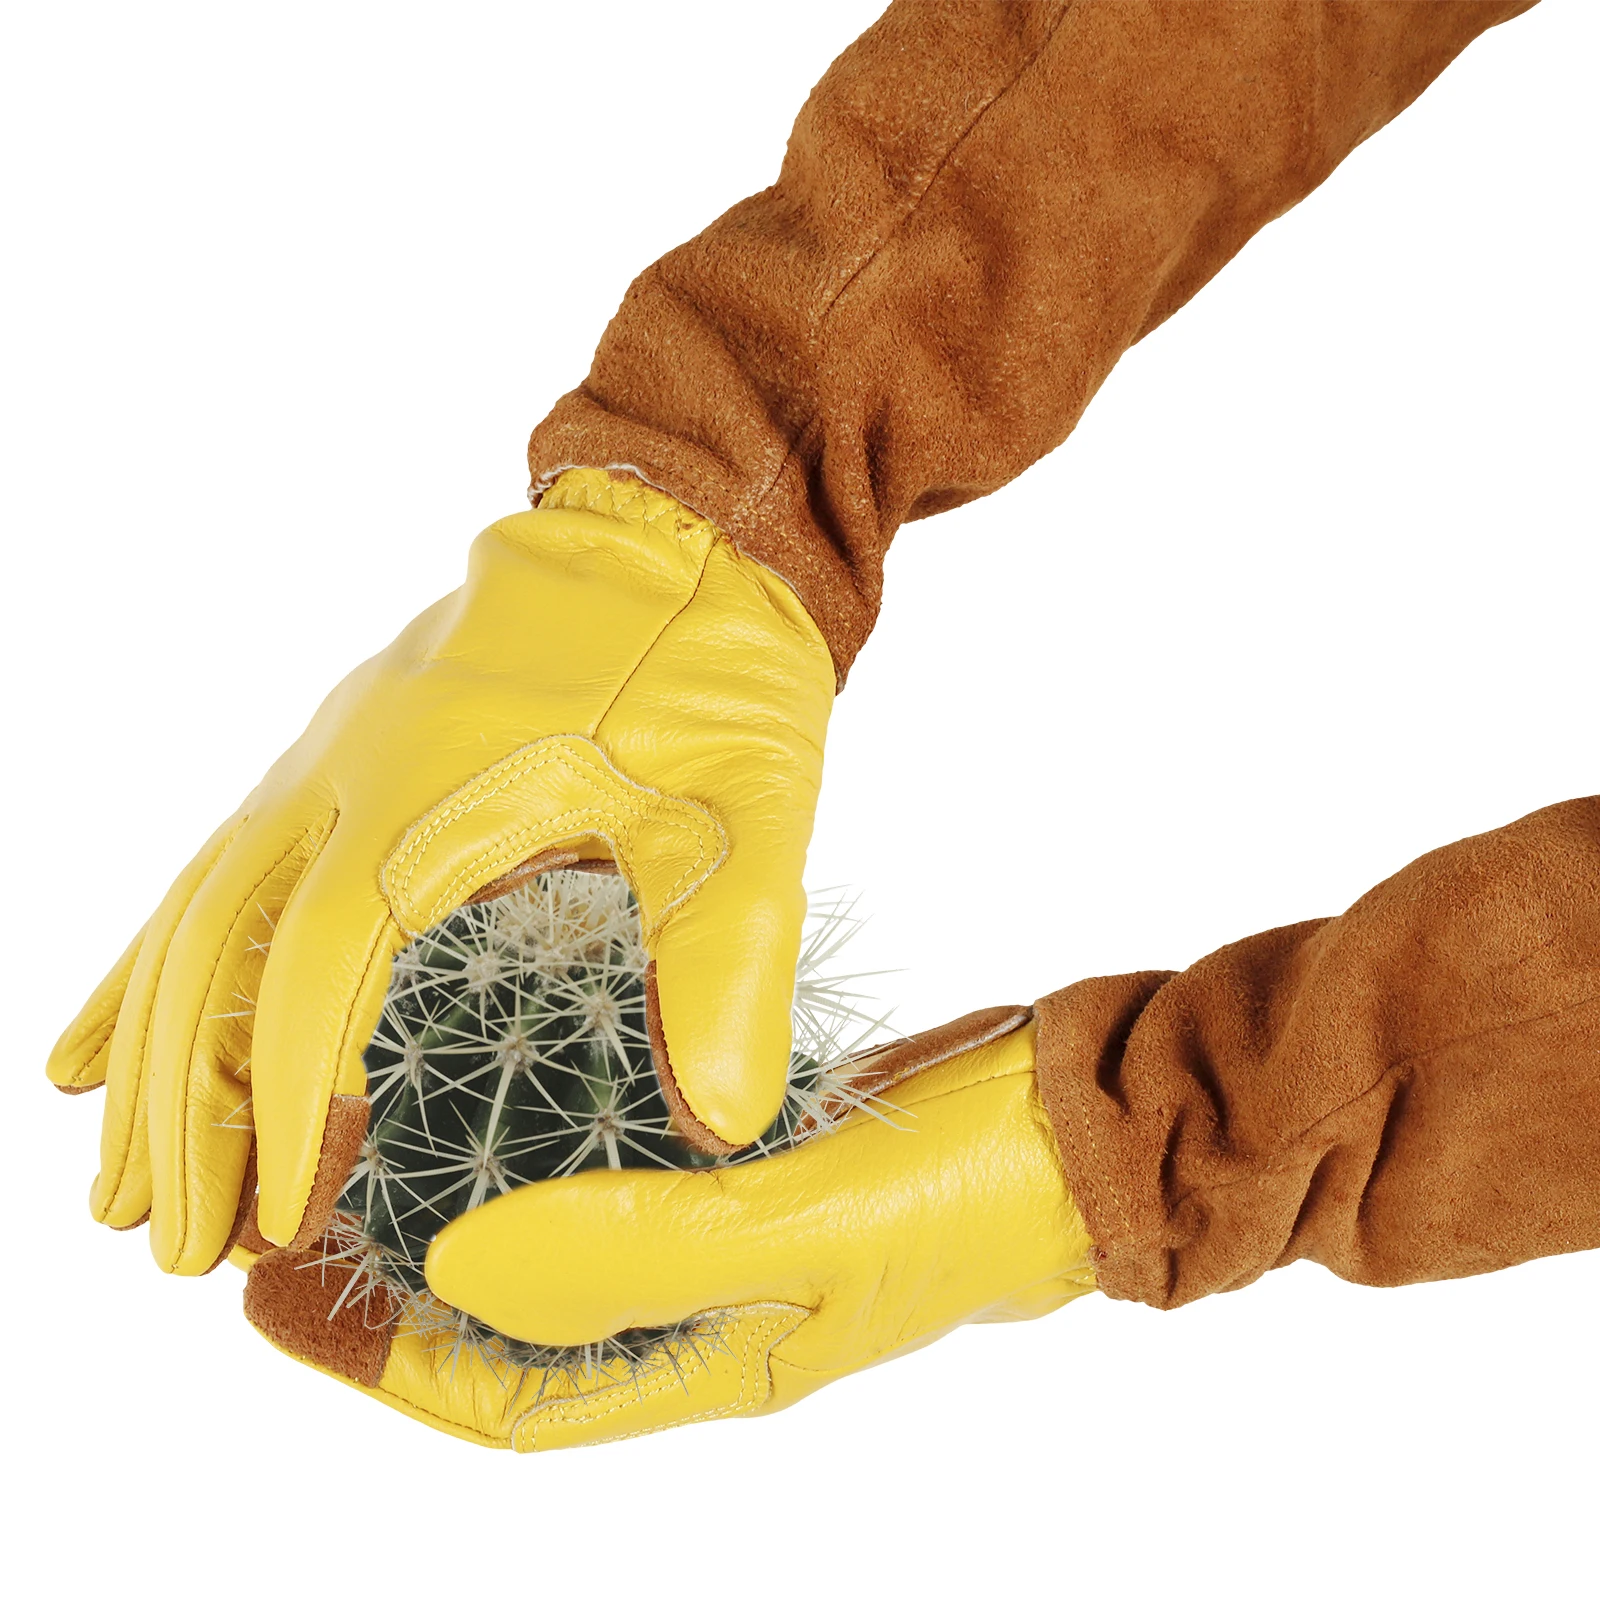 

Gardening Gloves Long Thorn Proof Pruning Gloves Unisex Breathable Working Gloves Safety Planting Gauntlet Protective Gloves for